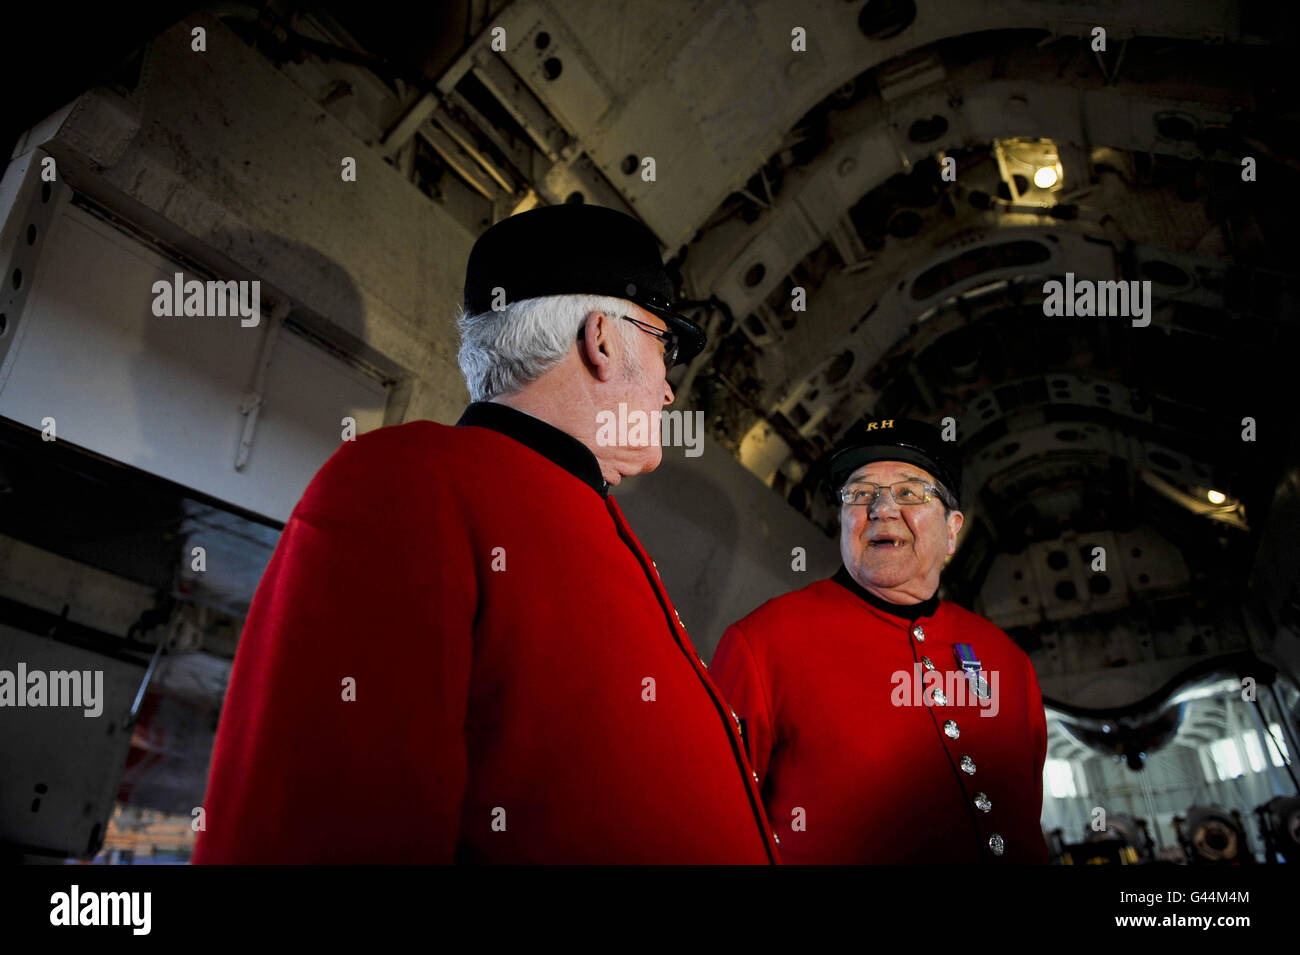 Chelsea pensioners chat beneath the bomb bay on the world's only flying Vulcan bomber during their visit and tour around the famous aircraft, which is being prepared at RAF Lyneham, Wiltshire, for the forthcoming run of air shows across the UK in 2011. Stock Photo